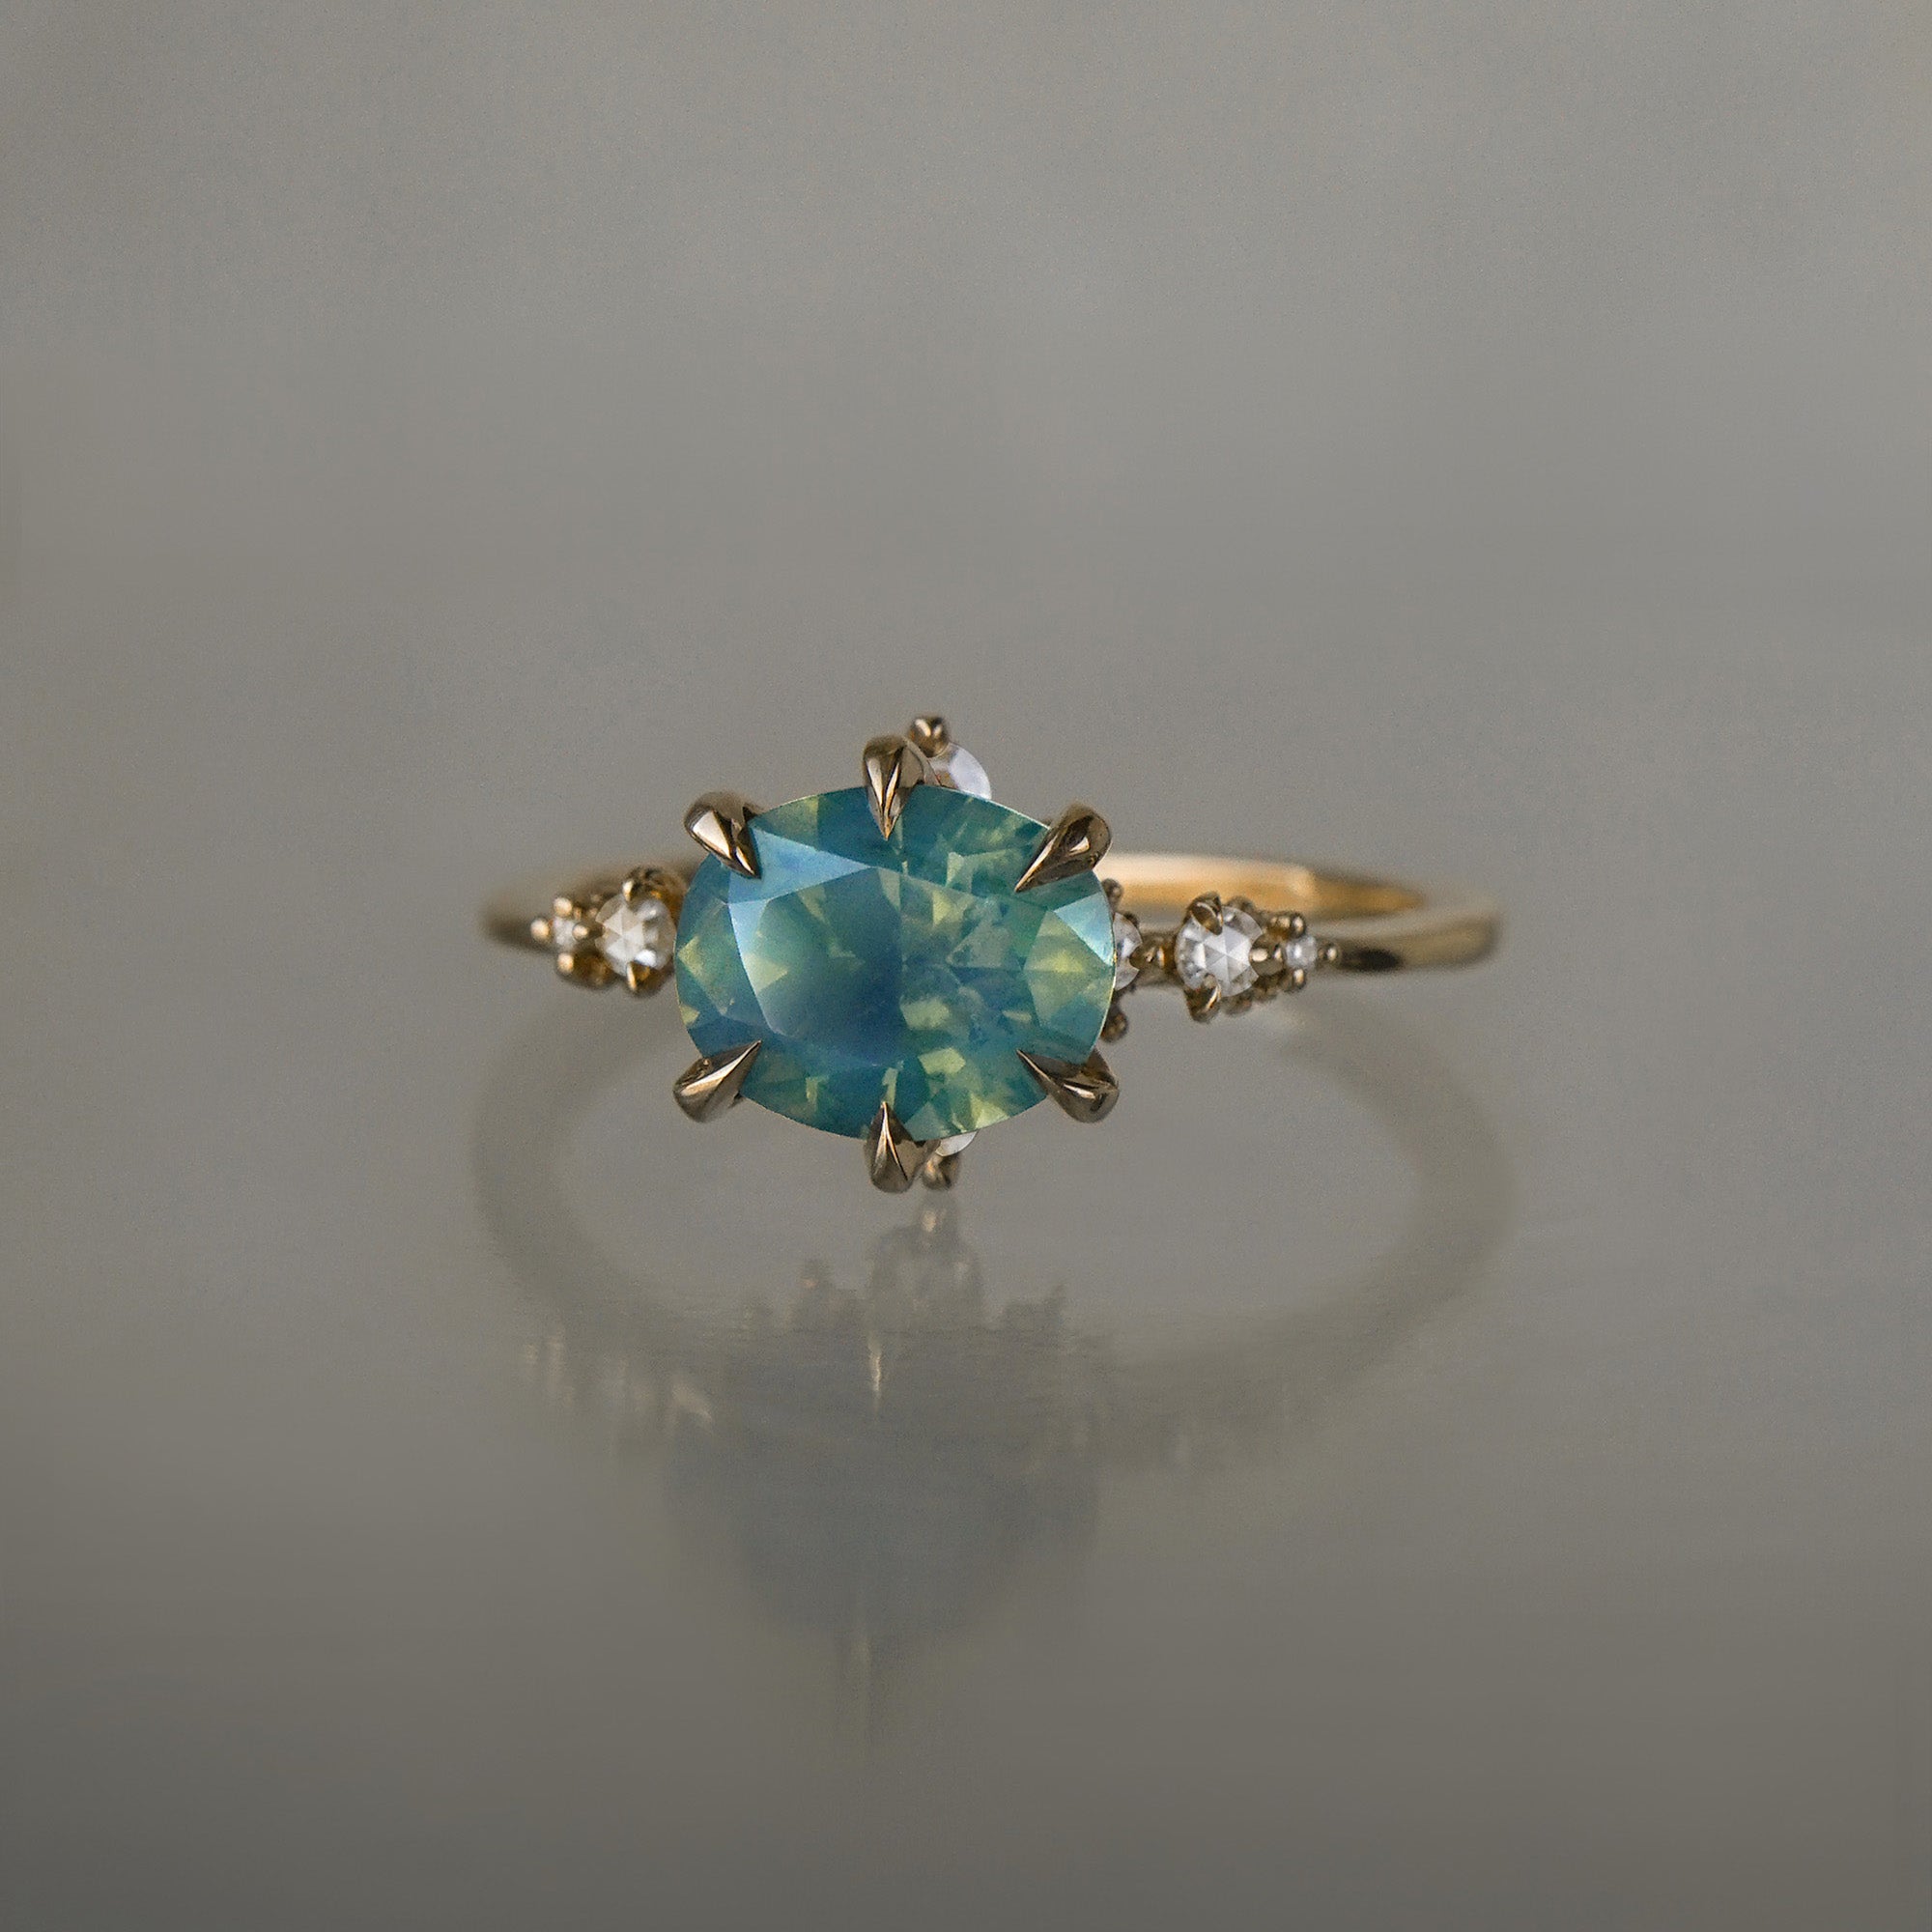 A delicate and ethereal "Nereid" one of a kind engagement ring by Laurie Fleming Jewellery, with a unique opalescent silky teal/turquoise/blue sapphire in an oval cut. The band is adorned with rose and brilliant cut diamonds and the ring is made in solid 14k yellow gold. The ring is positioned against a medium grey background.